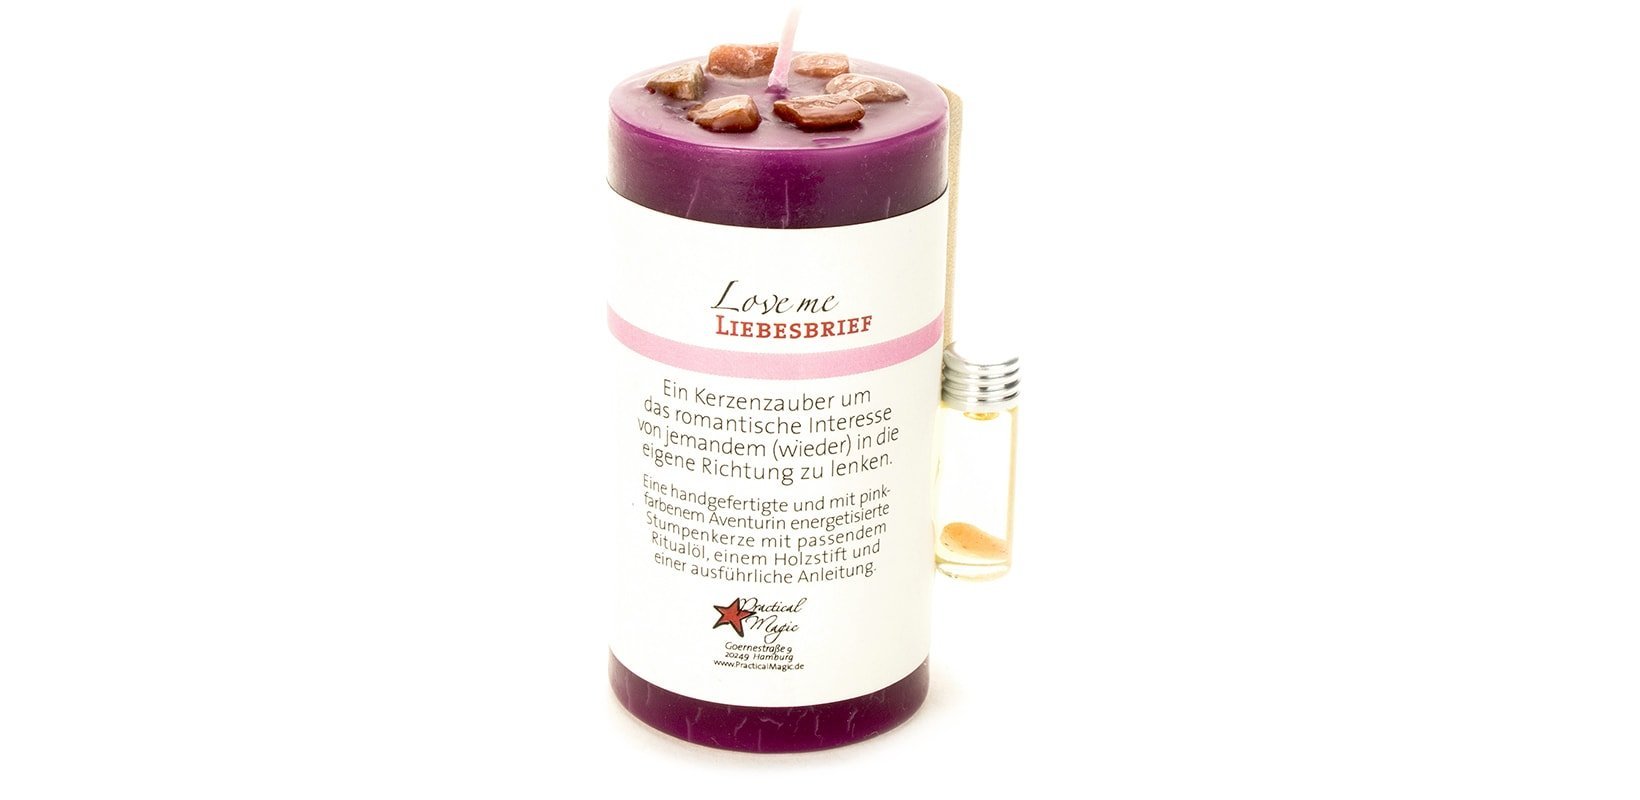 Candle Magic "Love me" - Liebesbrief